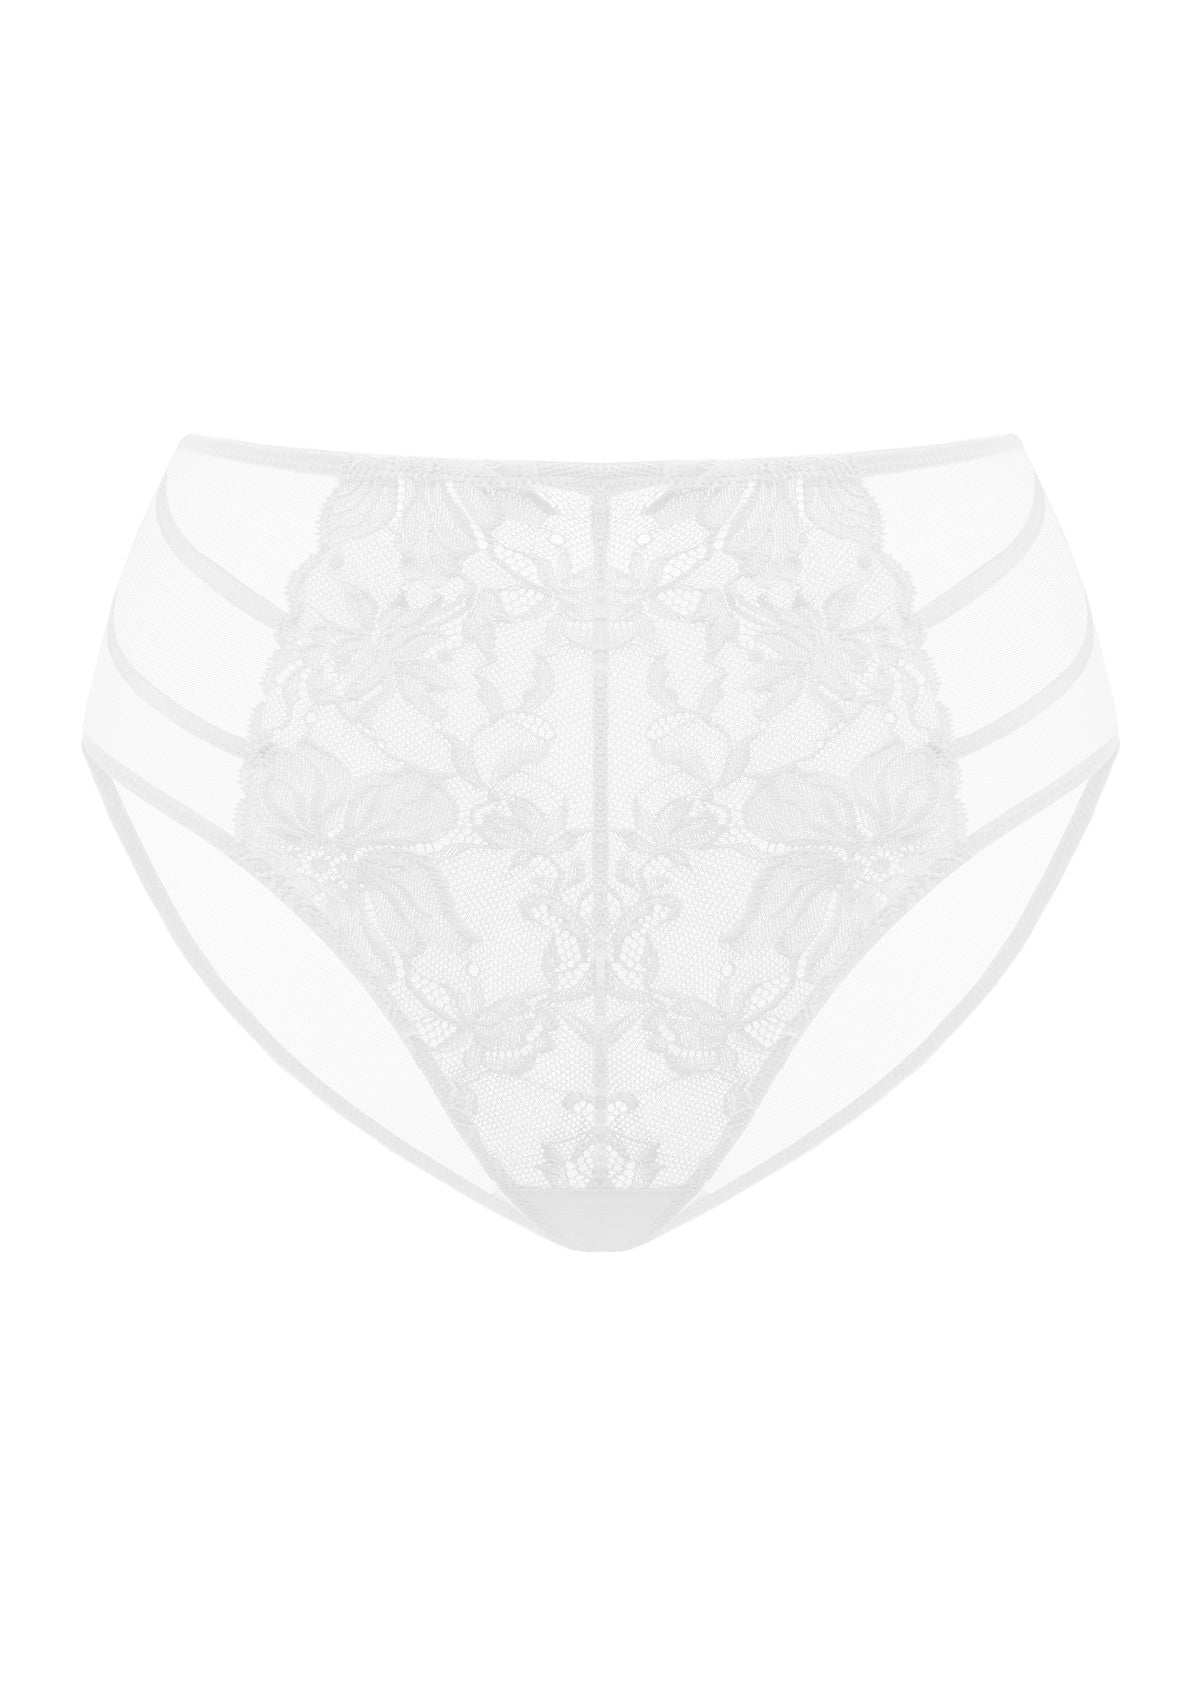 HSIA Spring Romance High-Rise Floral Lacy Panty-Comfort In Style - L / White